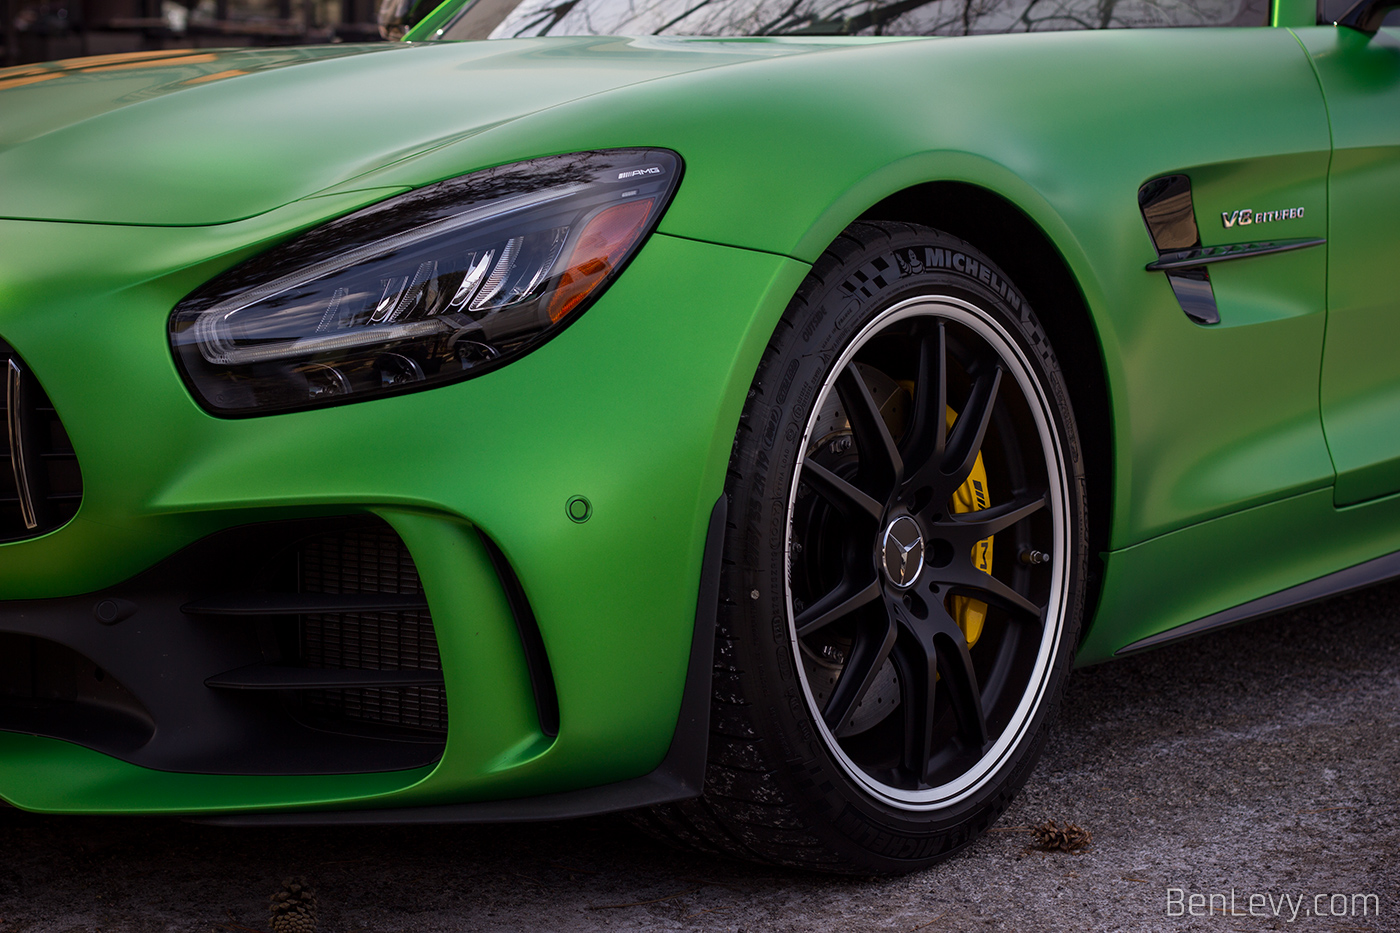 Front Detail of AMG GT R